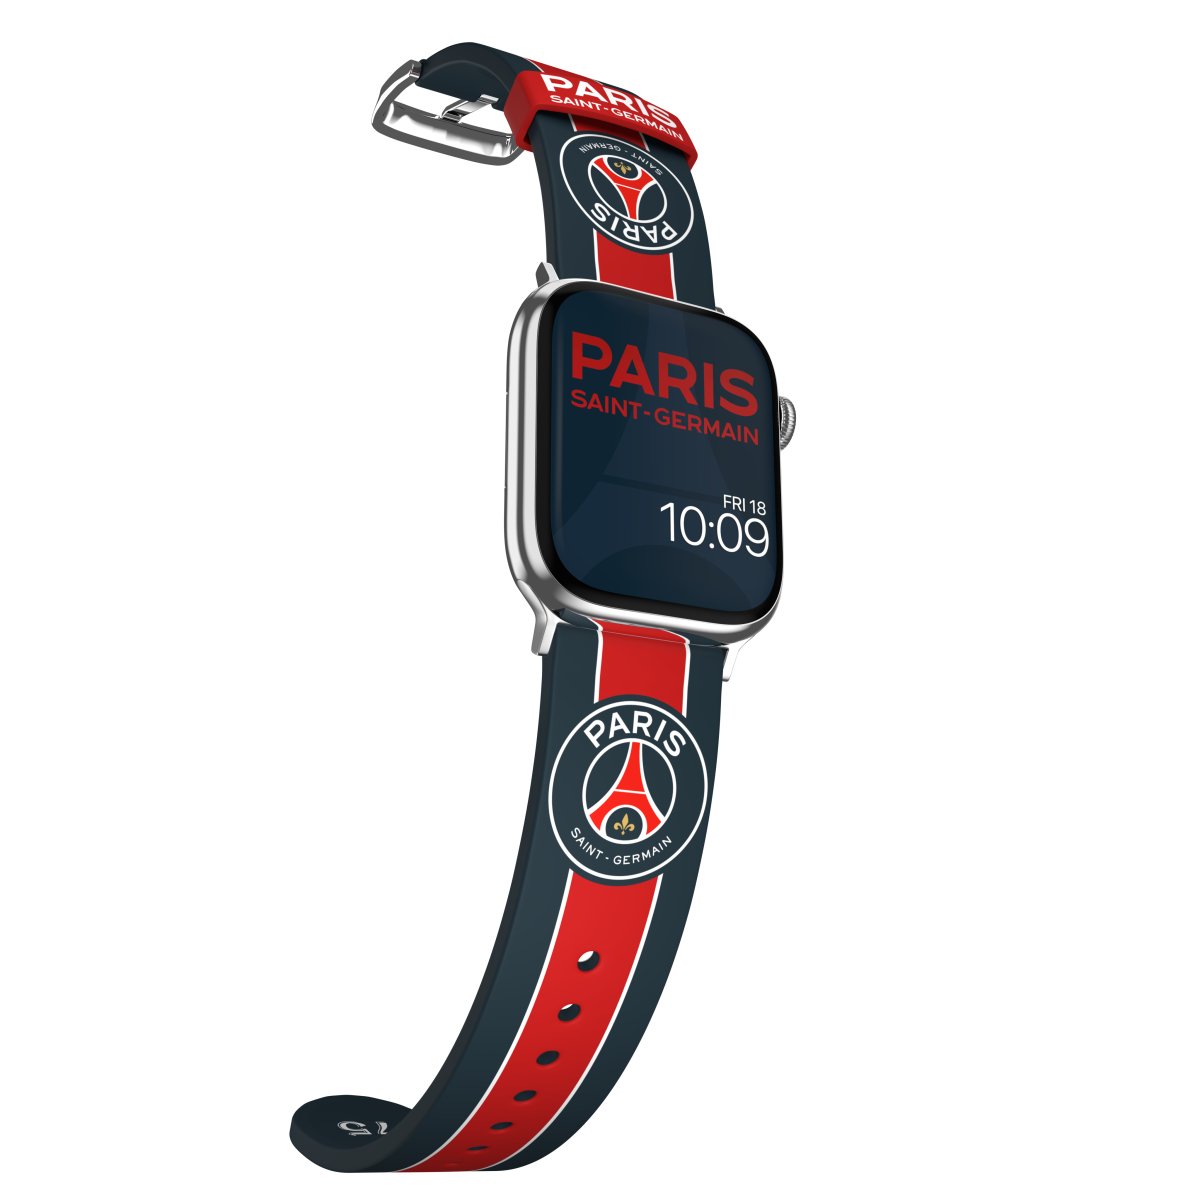 Paris Saint-Germain Apple Watch Band Officially Licensed MobyFox